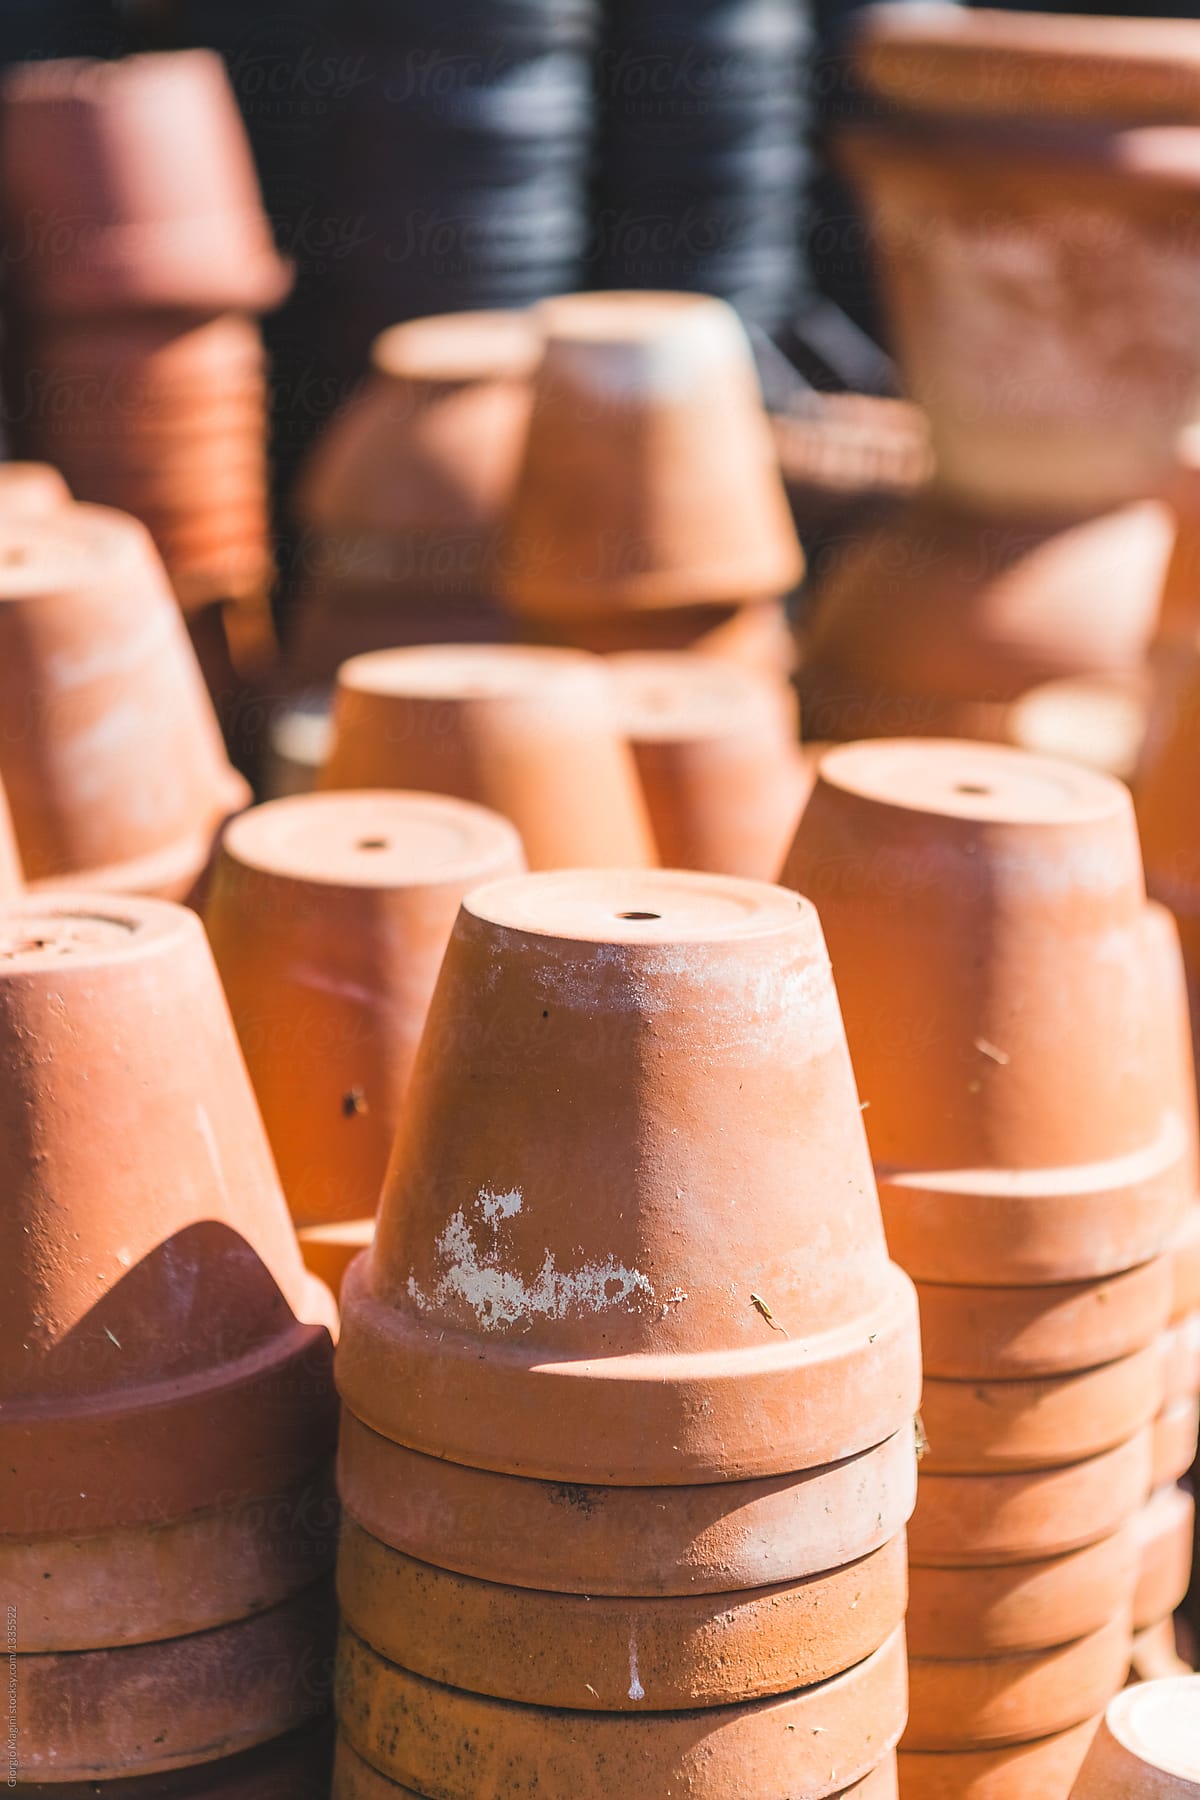 "Small Terracotta Pots Stacked Outdoors" by Stocksy Contributor